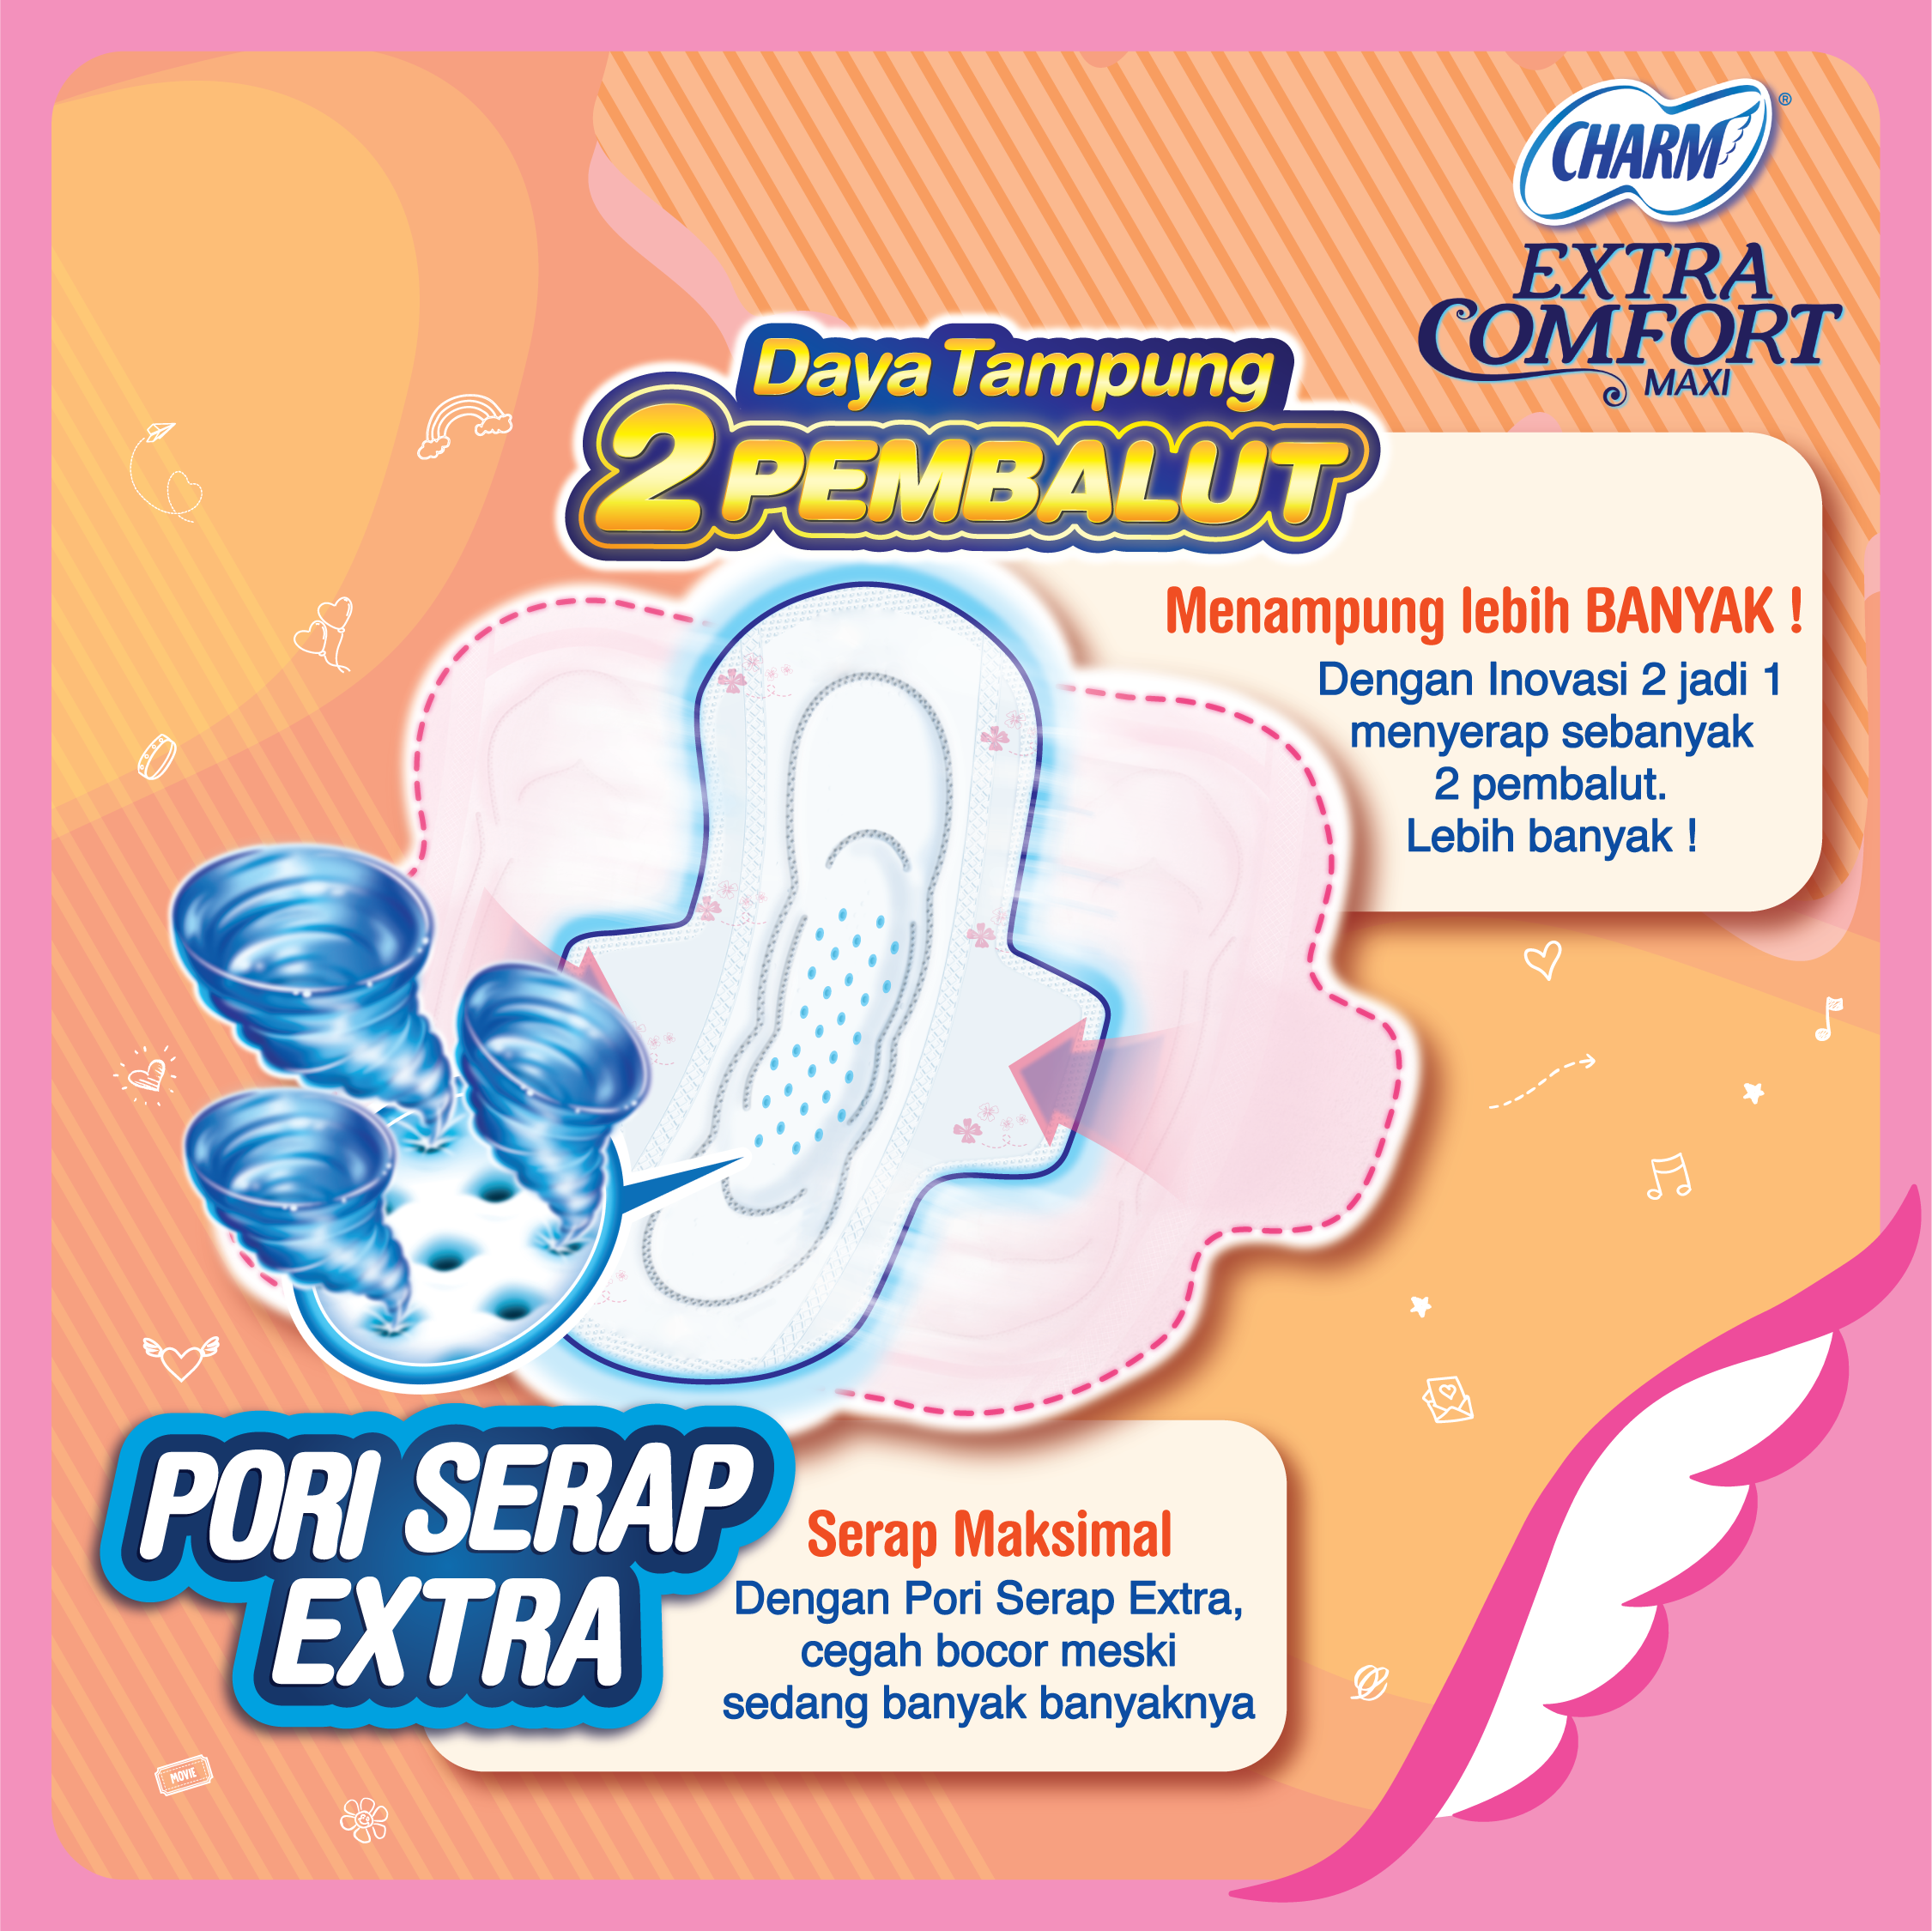 Charm Pembalut Extra Comfort 16's Maxi Wing 26Cm